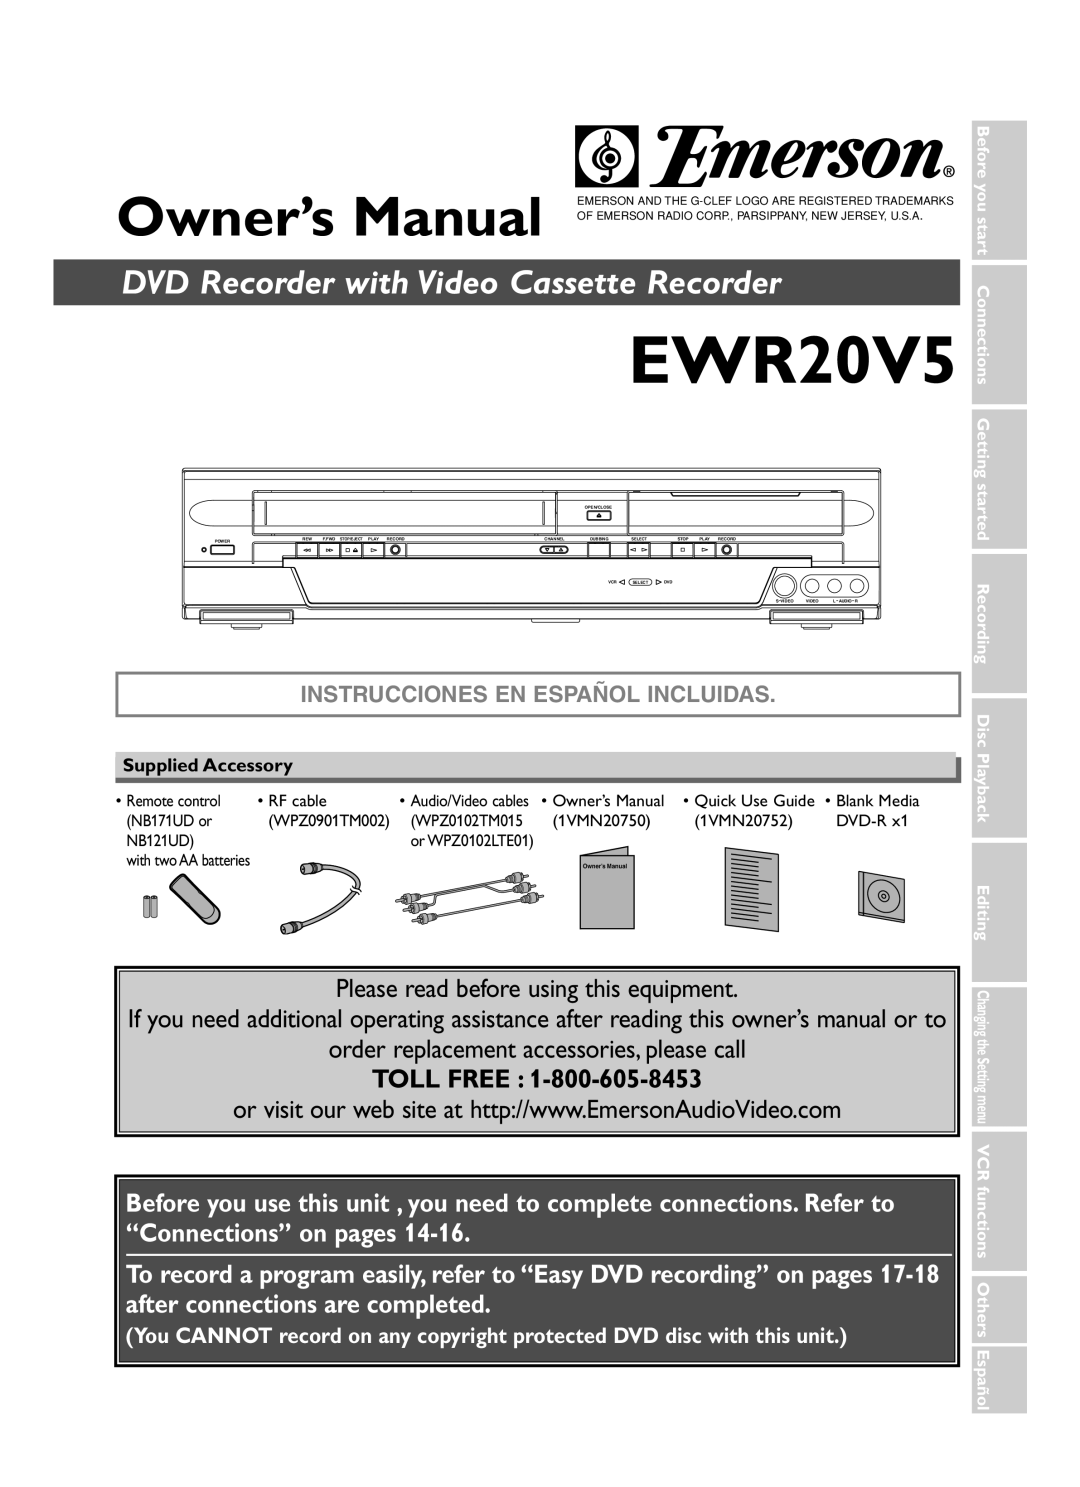 Emerson EWR20V5 owner manual DVD Recorder with Video Cassette Recorder 